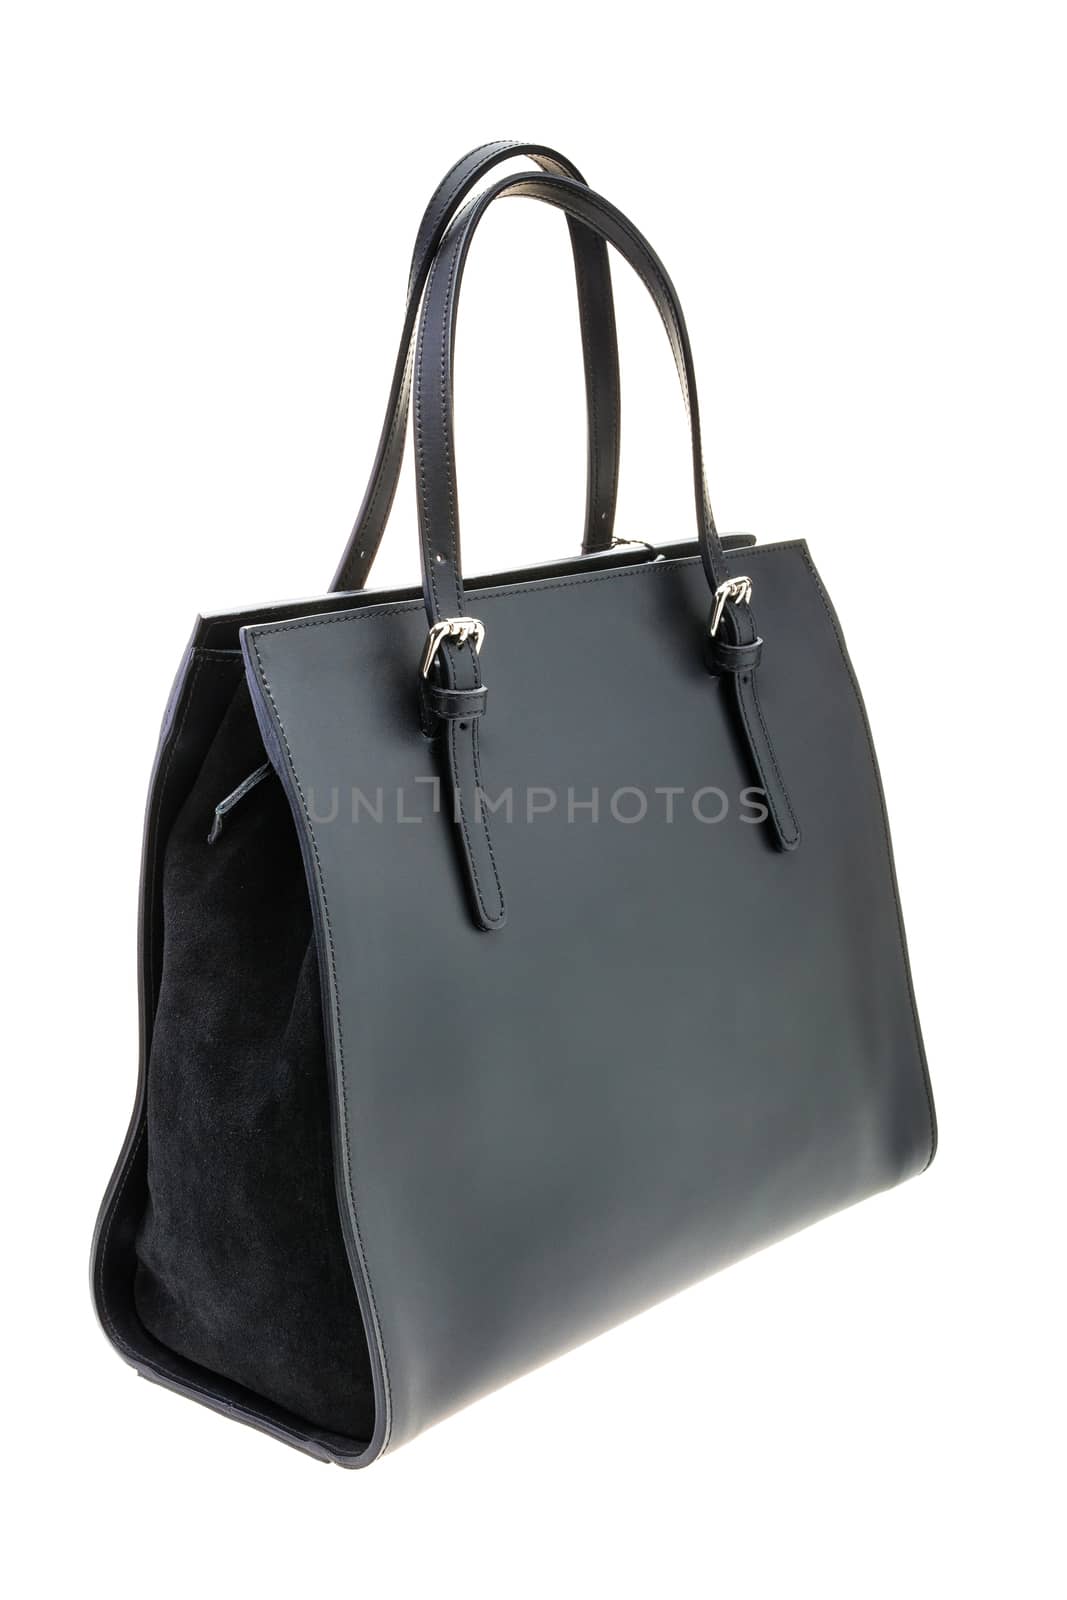 New black womens bag isolated on white background.